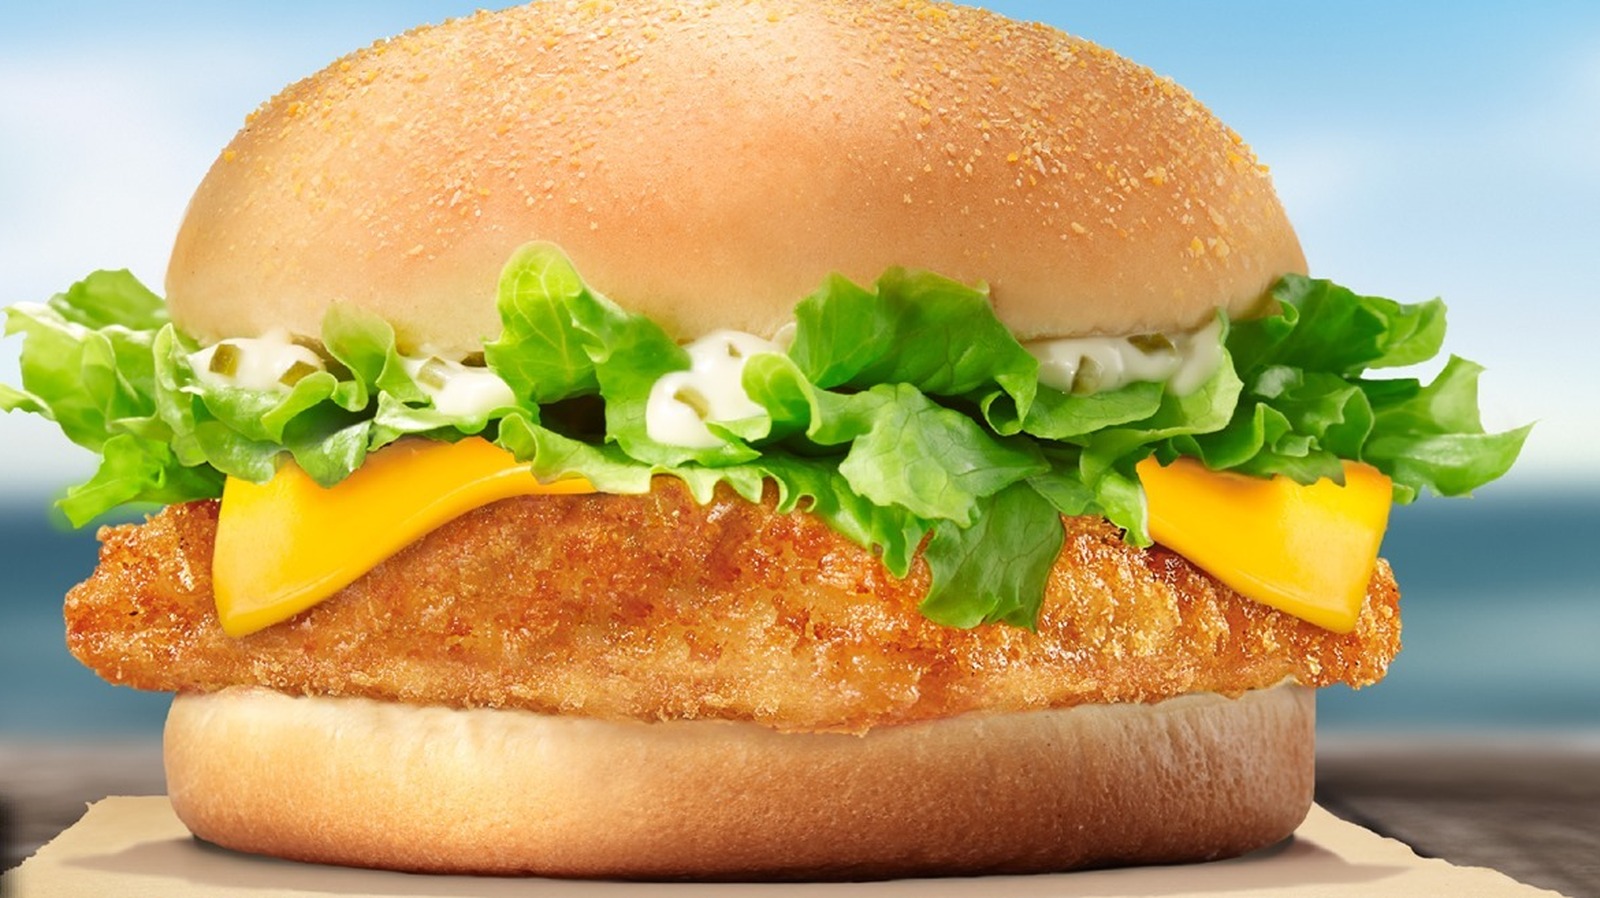 Why You Should Think Twice About Ordering Burger King's Big Fish